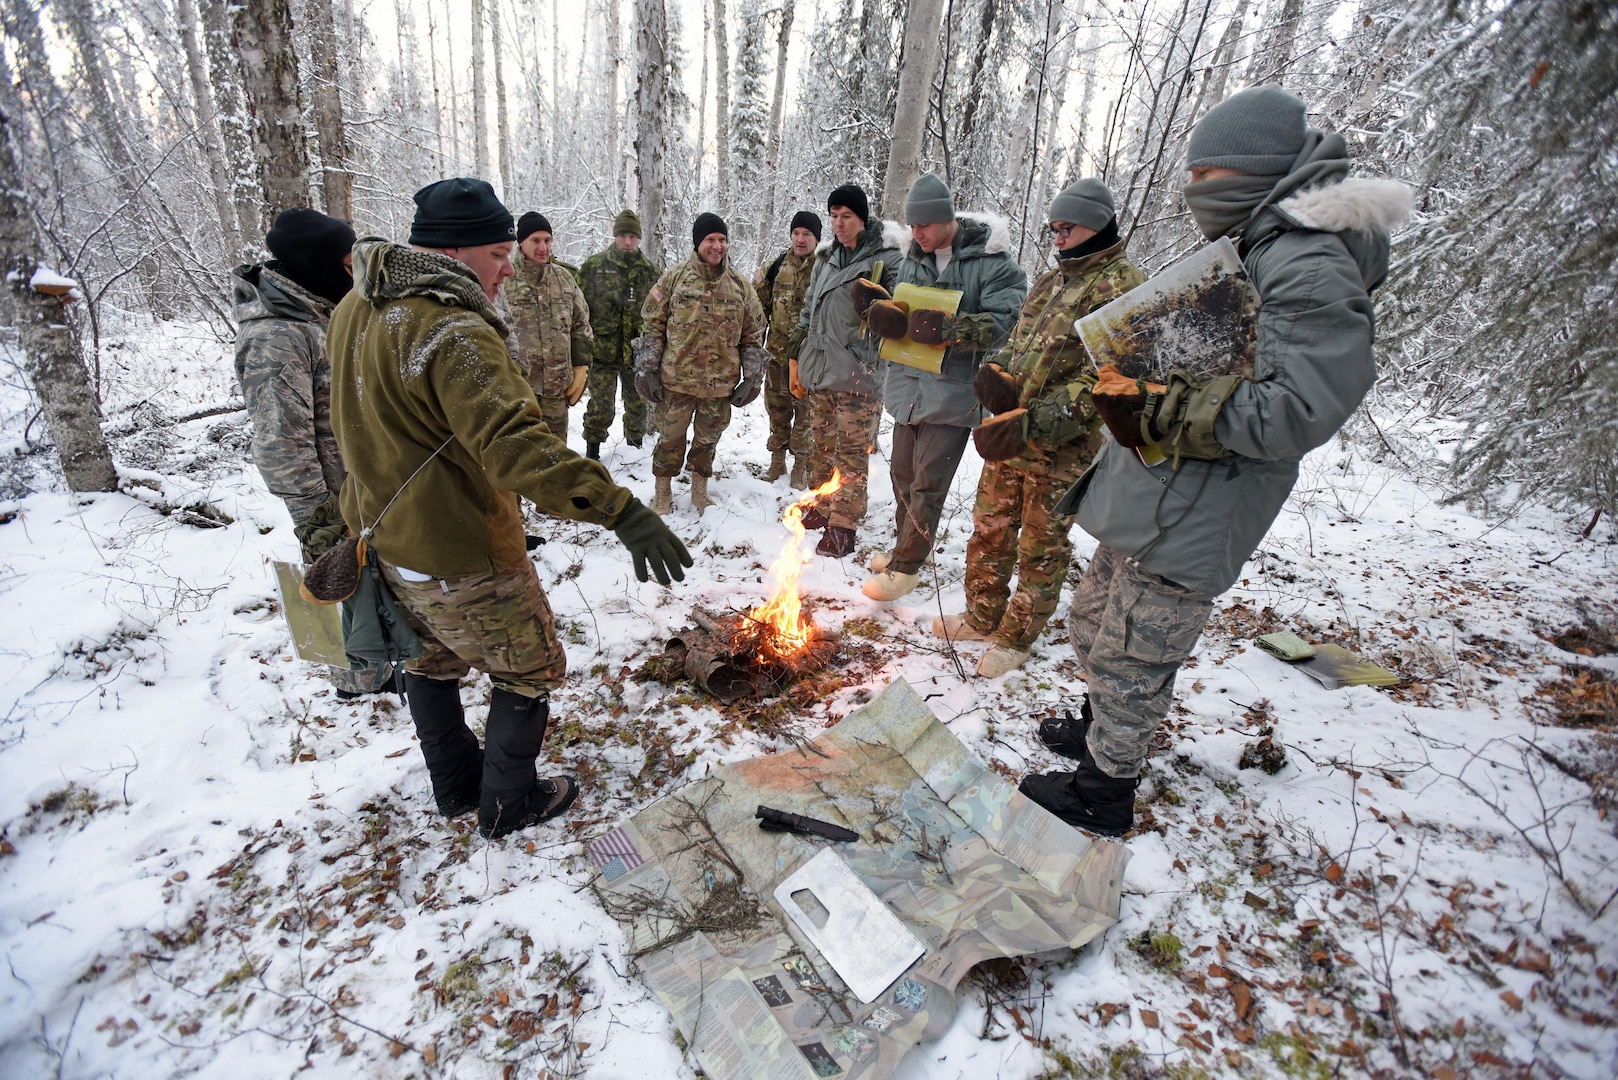 U.S. Air Force Staff Sgt. Jonathan Case (left), Arctic Cool School Survival, Evasion, Resistance, and Escape instructor, shows participants of the Arctic General Officer/Flag Officer Summit materials that are provided to Arctic Cool School students and what they can do with them in order to survive and thrive in the Arctic Nov. 9, 2016.  U.S. Air Force Lt. Gen. Ken Wilsbach, Alaskan NORAD Region, Alaskan Command and 11th Air Force commander and U.S. Army Maj. Gen. Bryan Owens, U.S. Army Alaska commander hosted the conference, which included flag officers from the U.S. Air Force, U.S. Army, U.S. Coast Guard, Alaska National Guard and Canadian Forces, to strengthen partnerships, discuss future Arctic and Alaskan challenges and joint capabilities. 